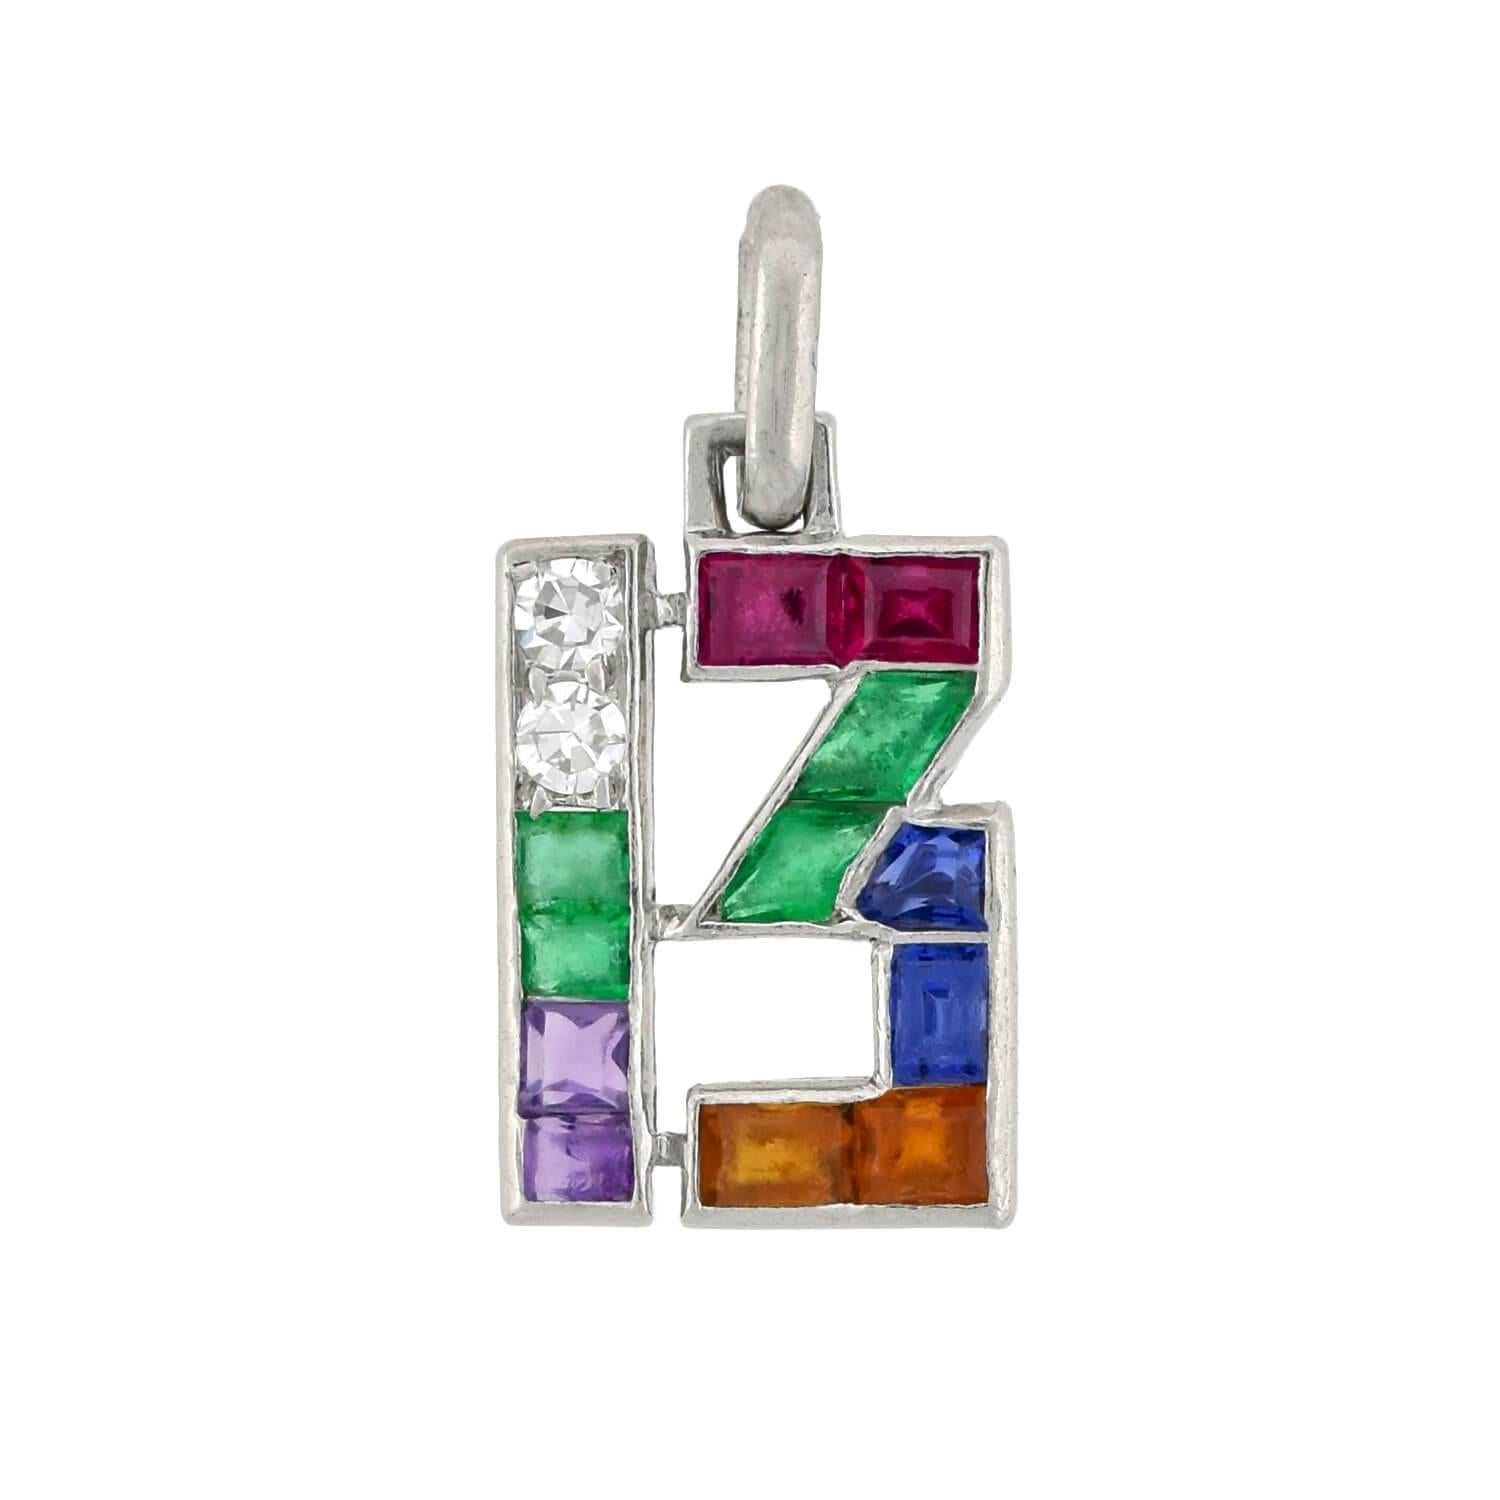 A wonderful multi-gemstone lucky number charm pendant from the Art Deco (ca1920s) era! By Cartier London, this fabulous piece is crafted in platinum and forms the shape of the number 